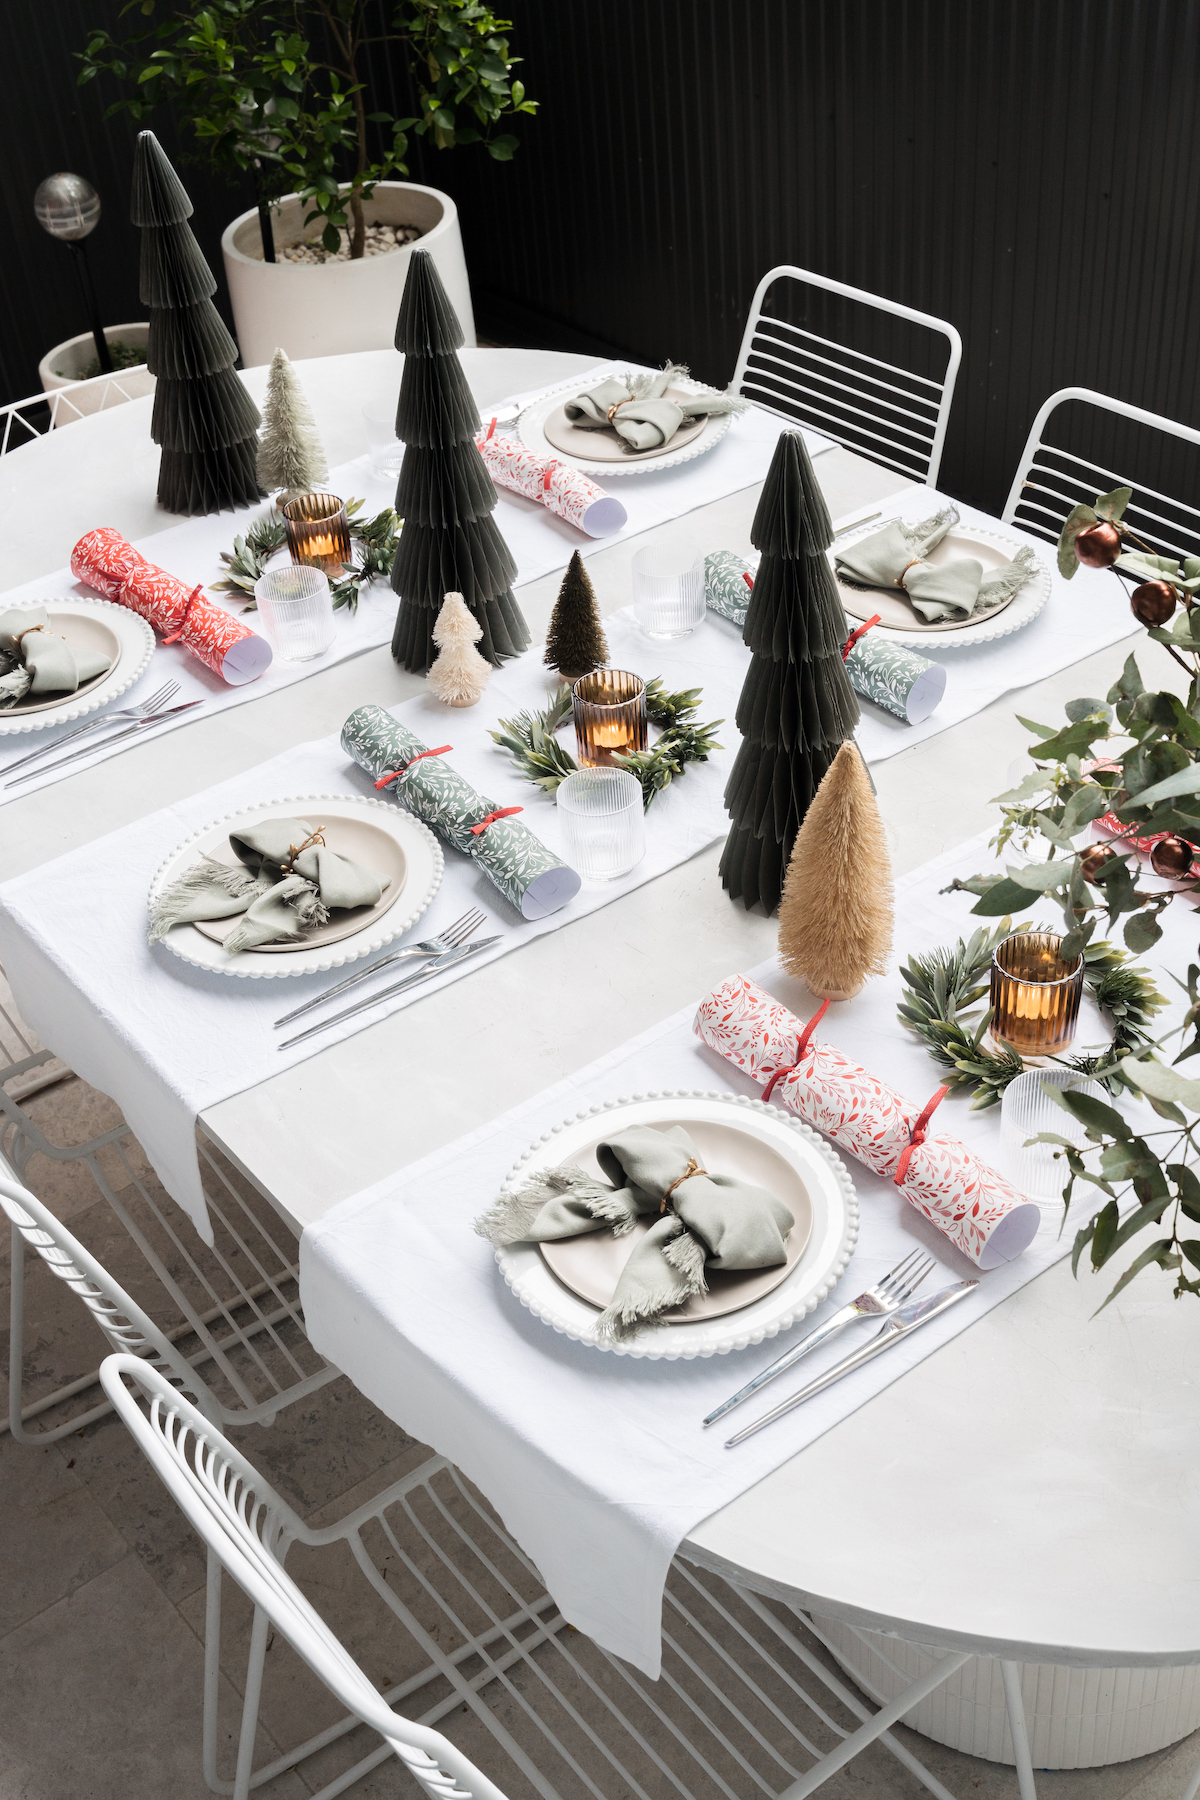 Top view of festive outdoor table